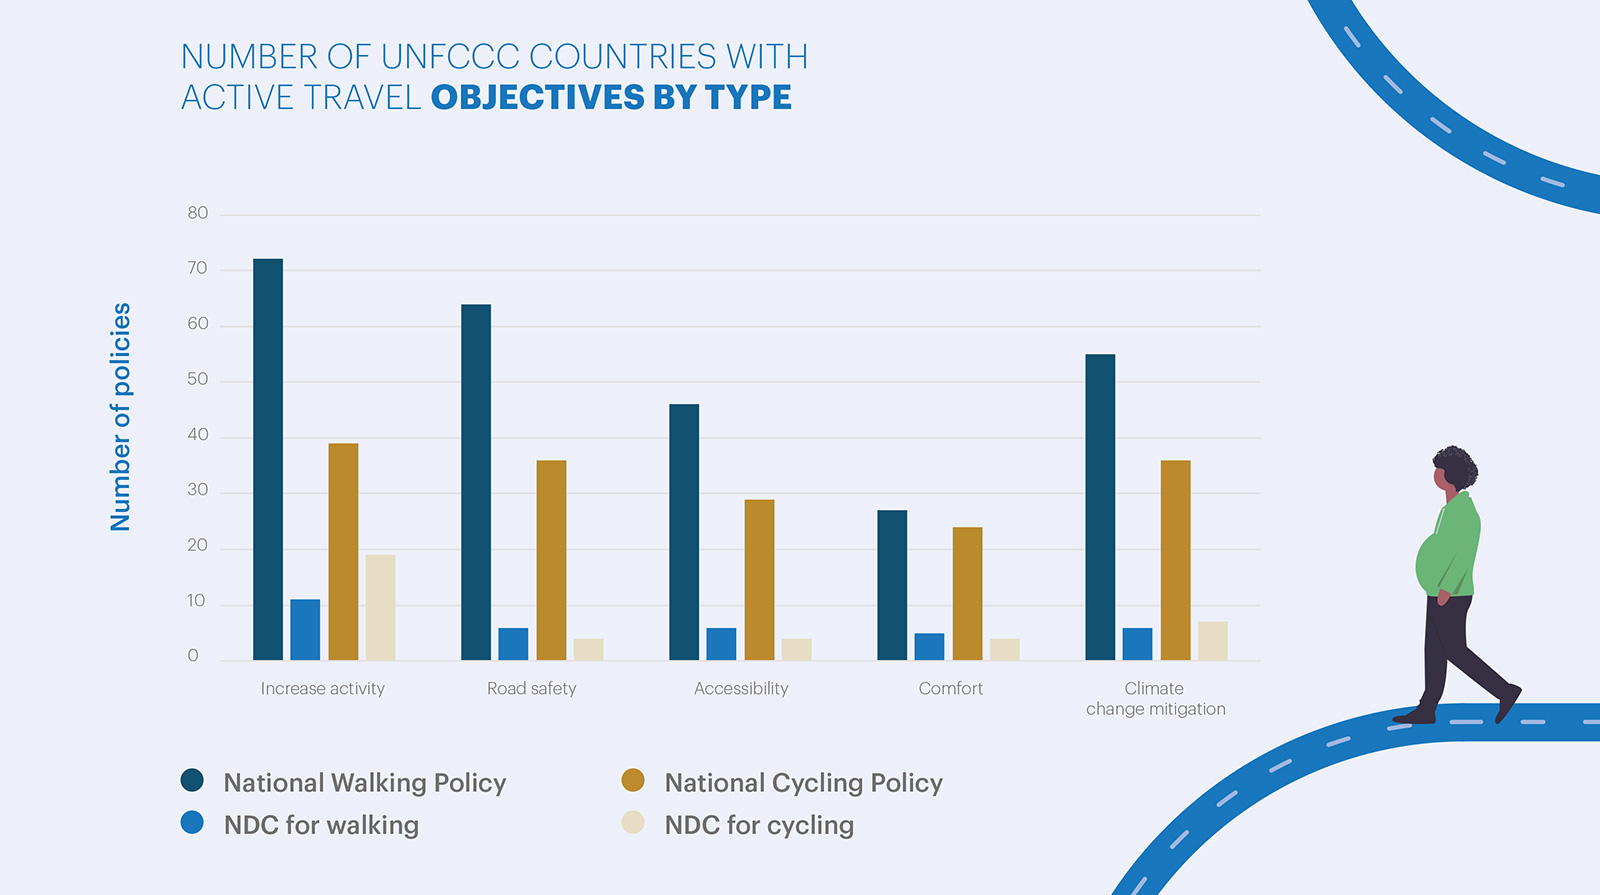 Number of UNFCCC  countries with active travel objectives by type.